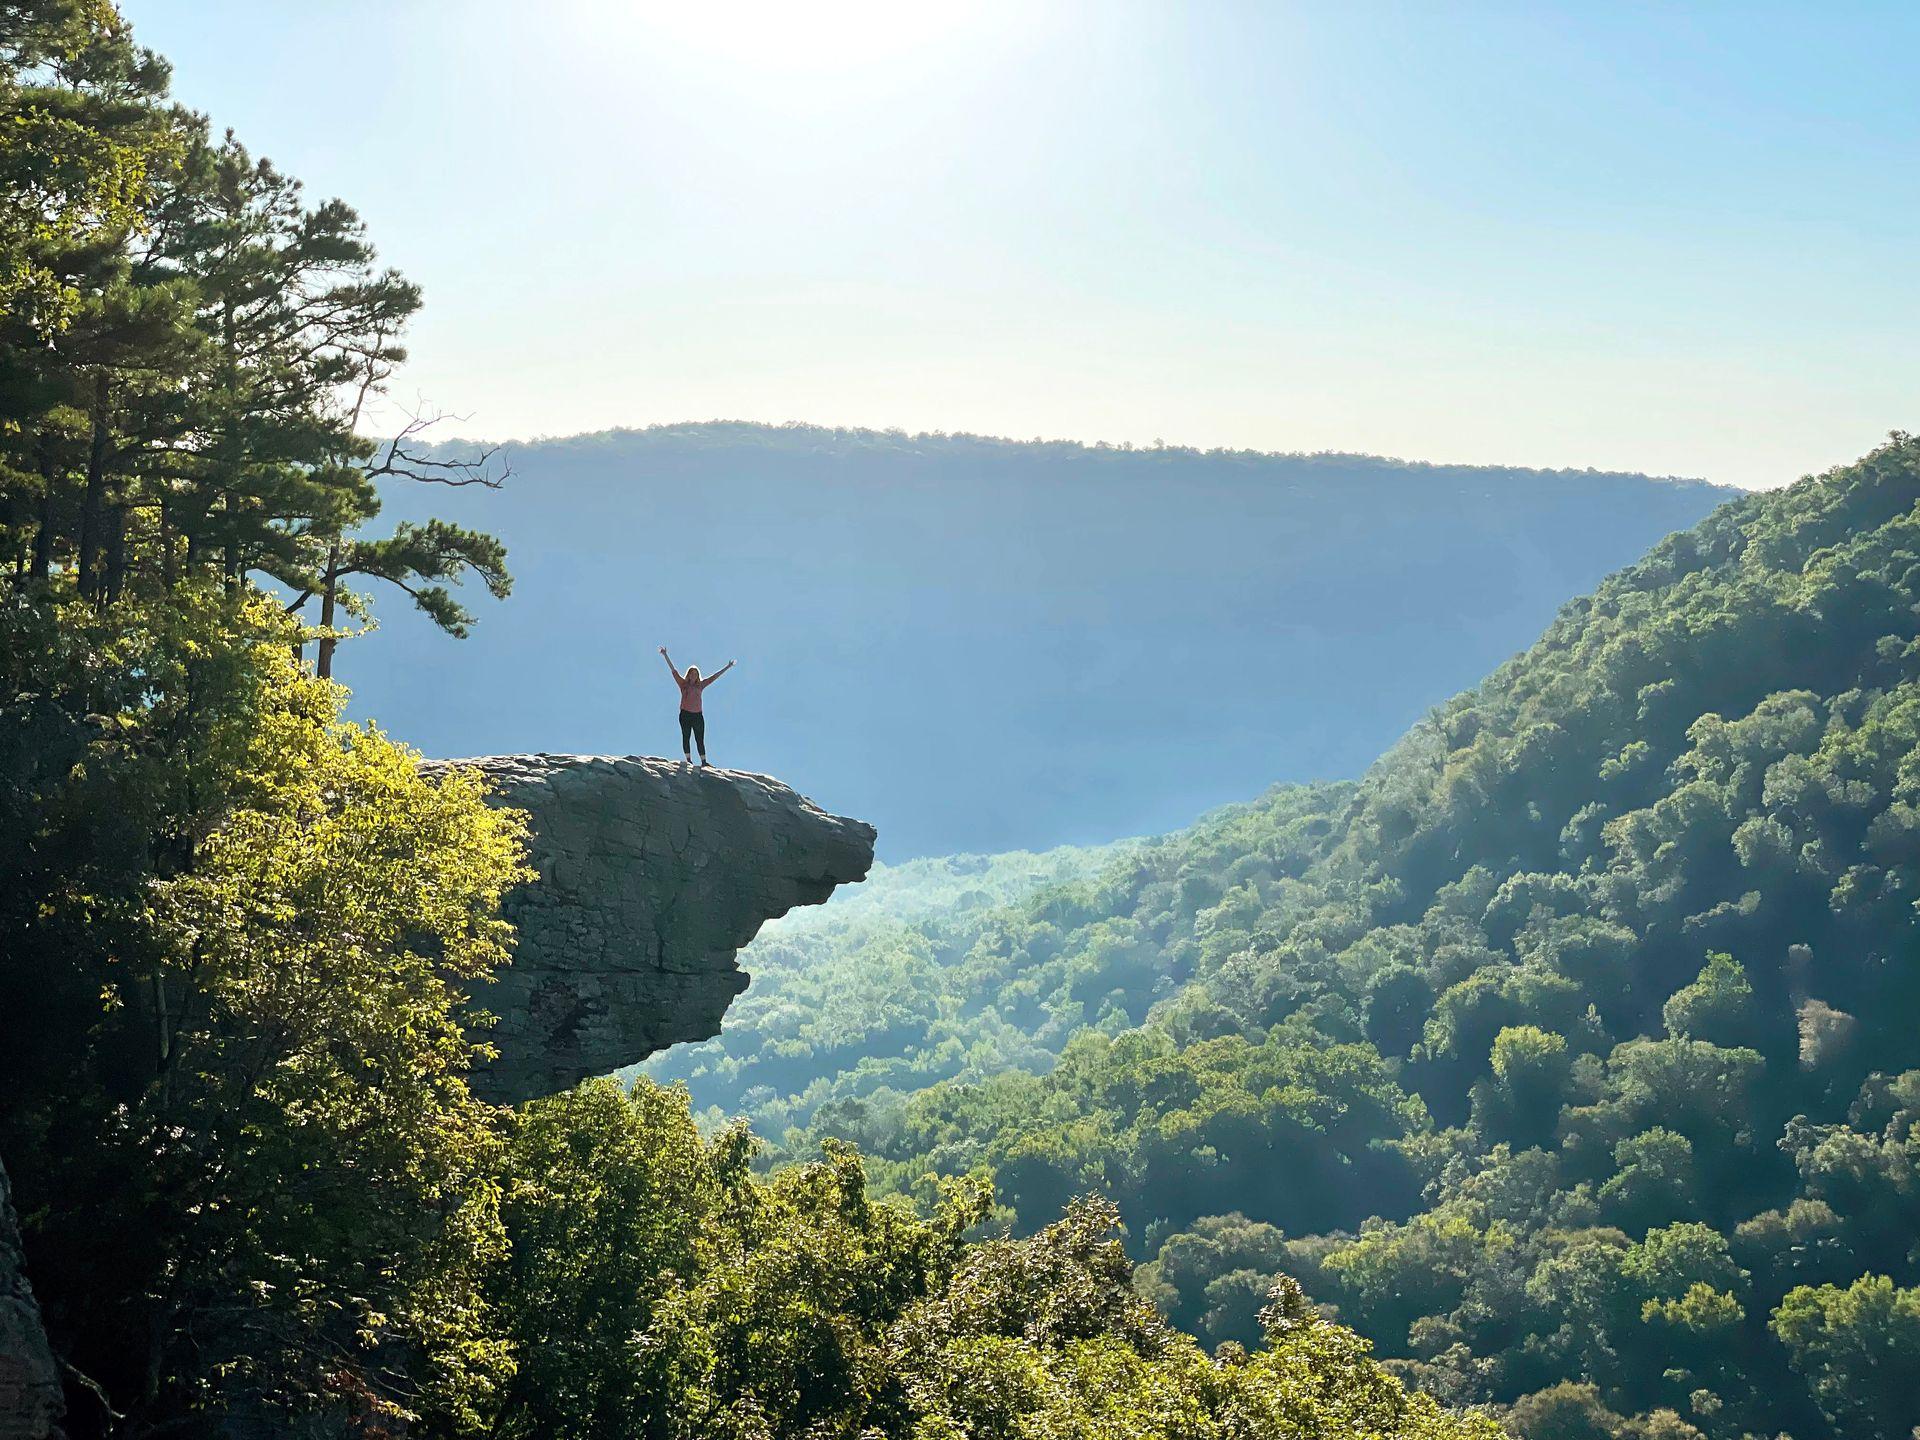 Lydia standing on Hawkbill Crag/Whitaker Point in Arkansas. She is far away and has her hands up in the air.